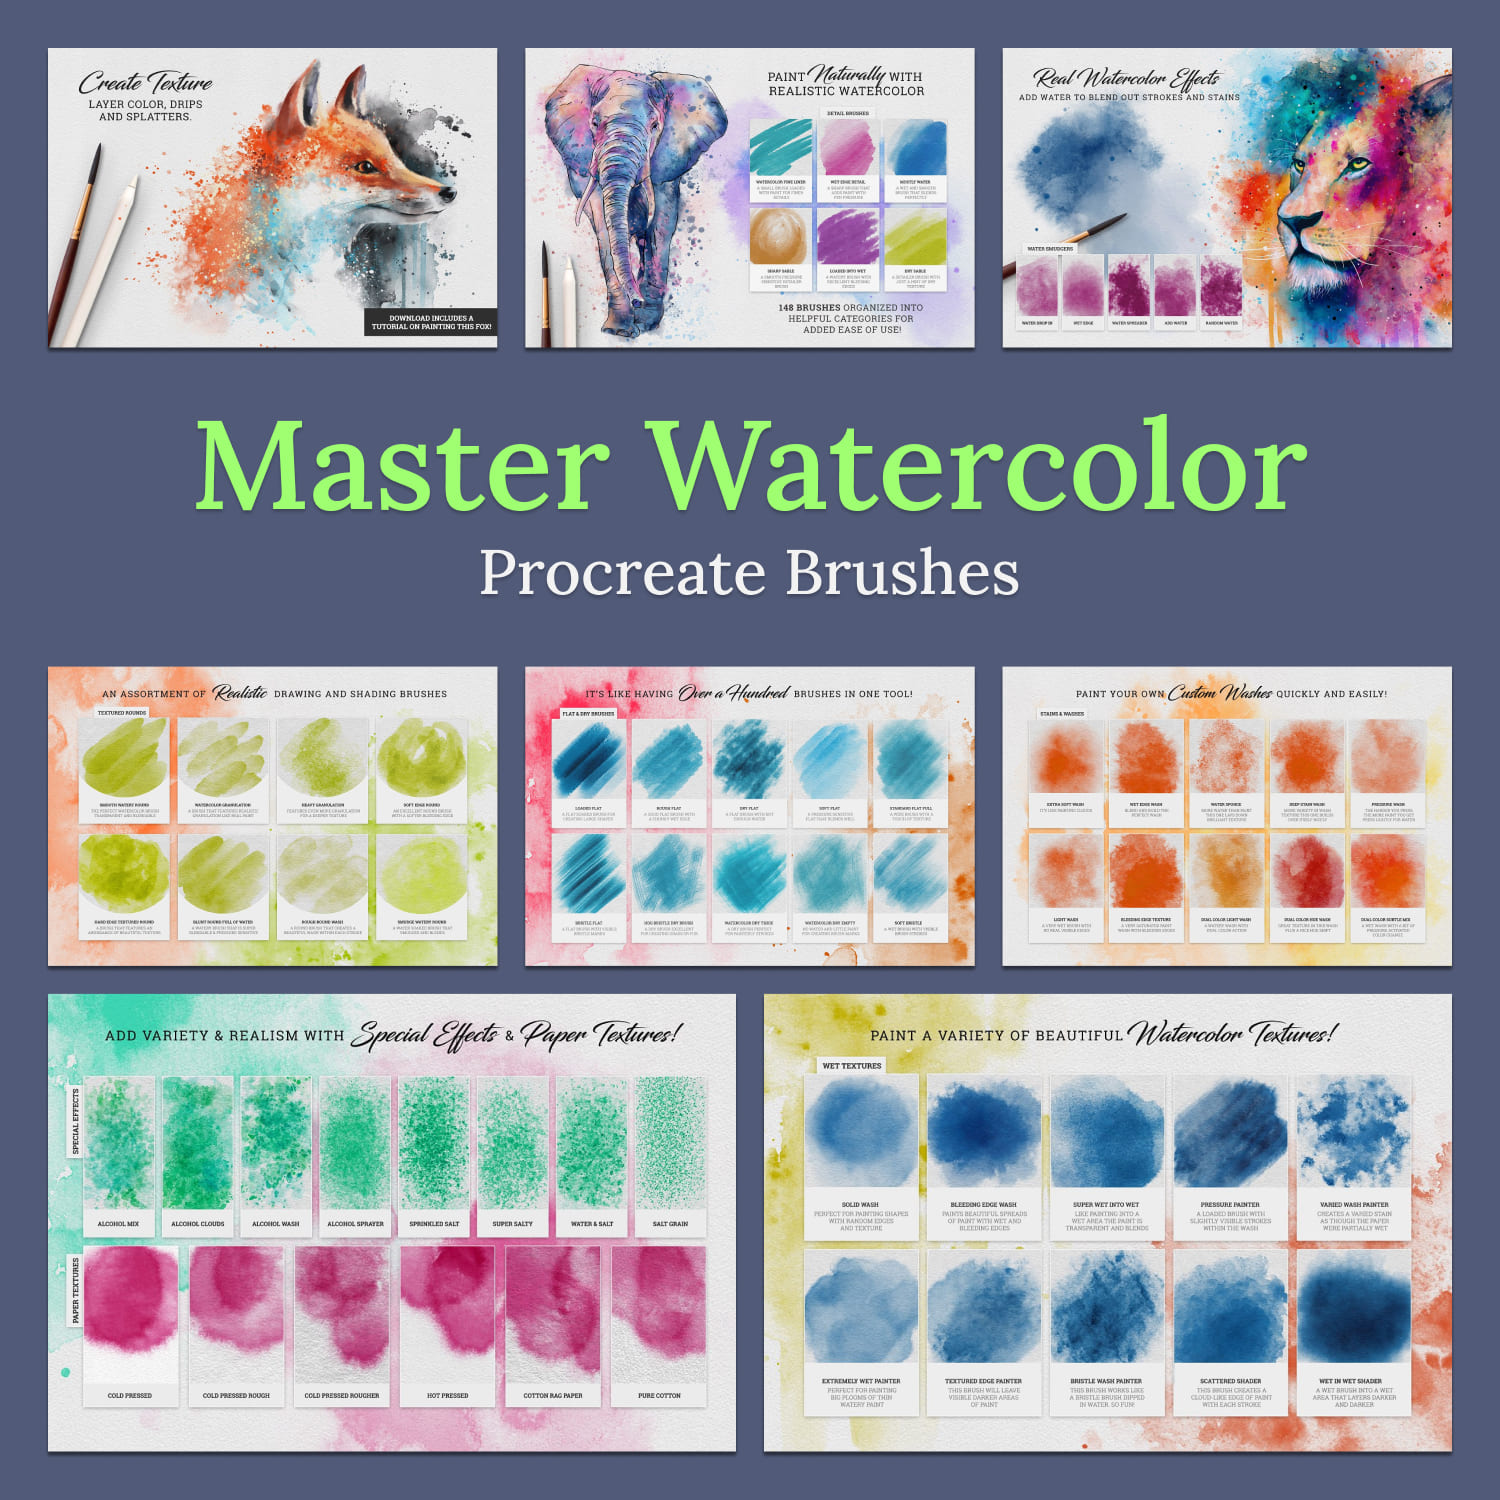 Master Watercolor Procreate Brushes - main image preview.